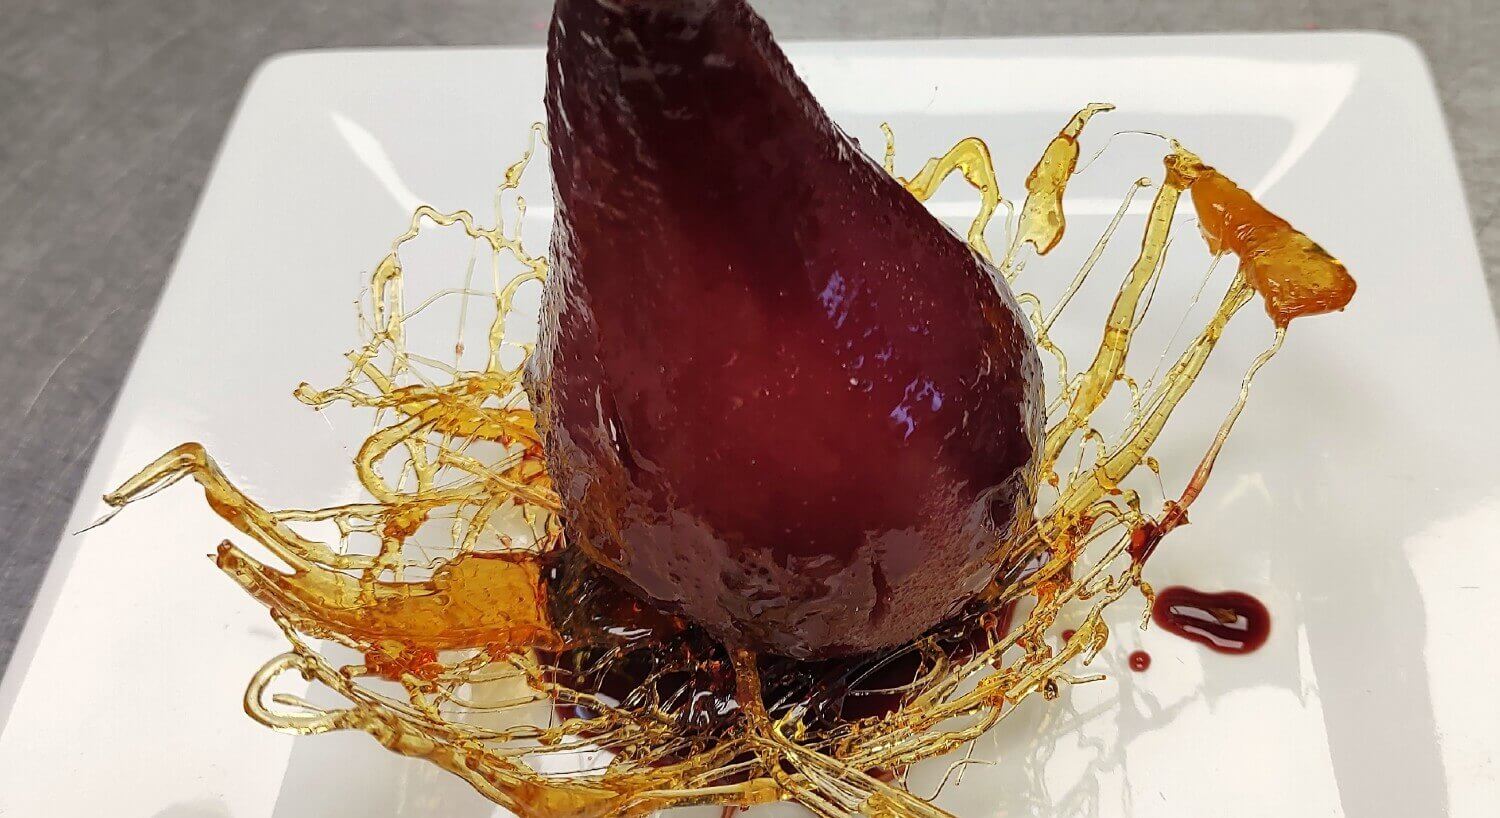 pear sitting unright on white porcelain dish drizzled with honey